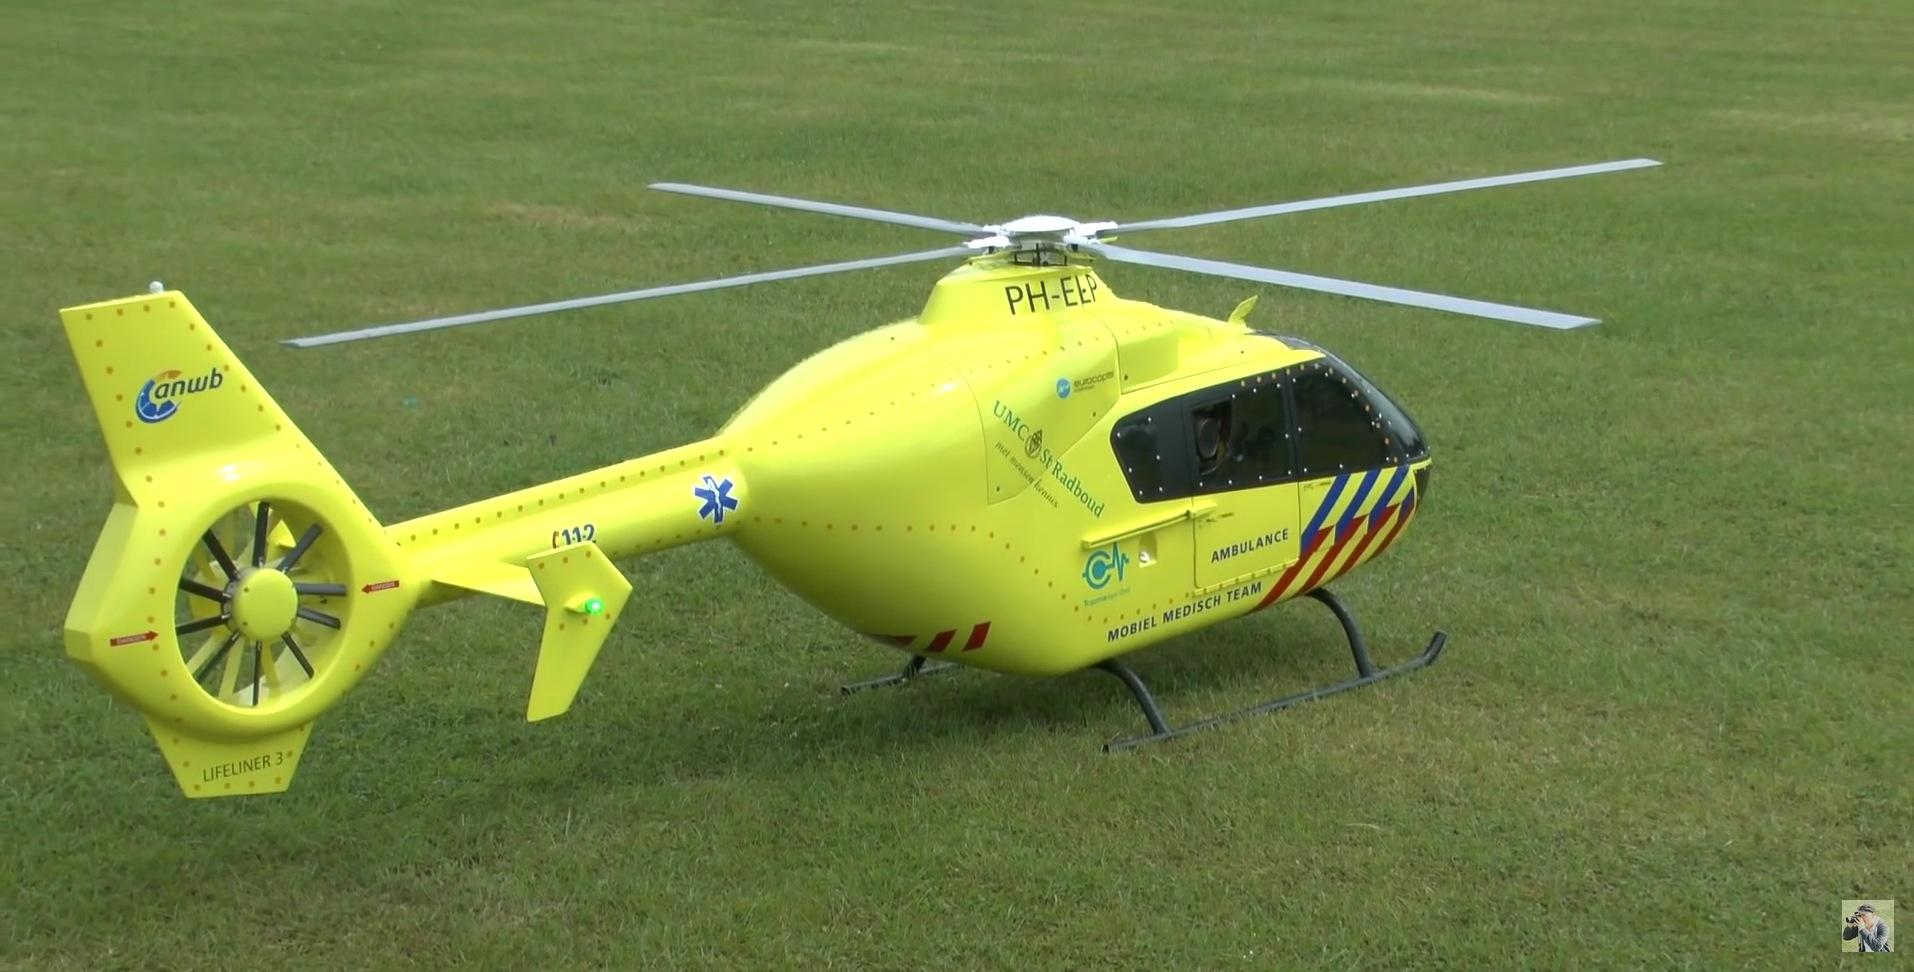 The Biggest Remote Control Helicopter: 